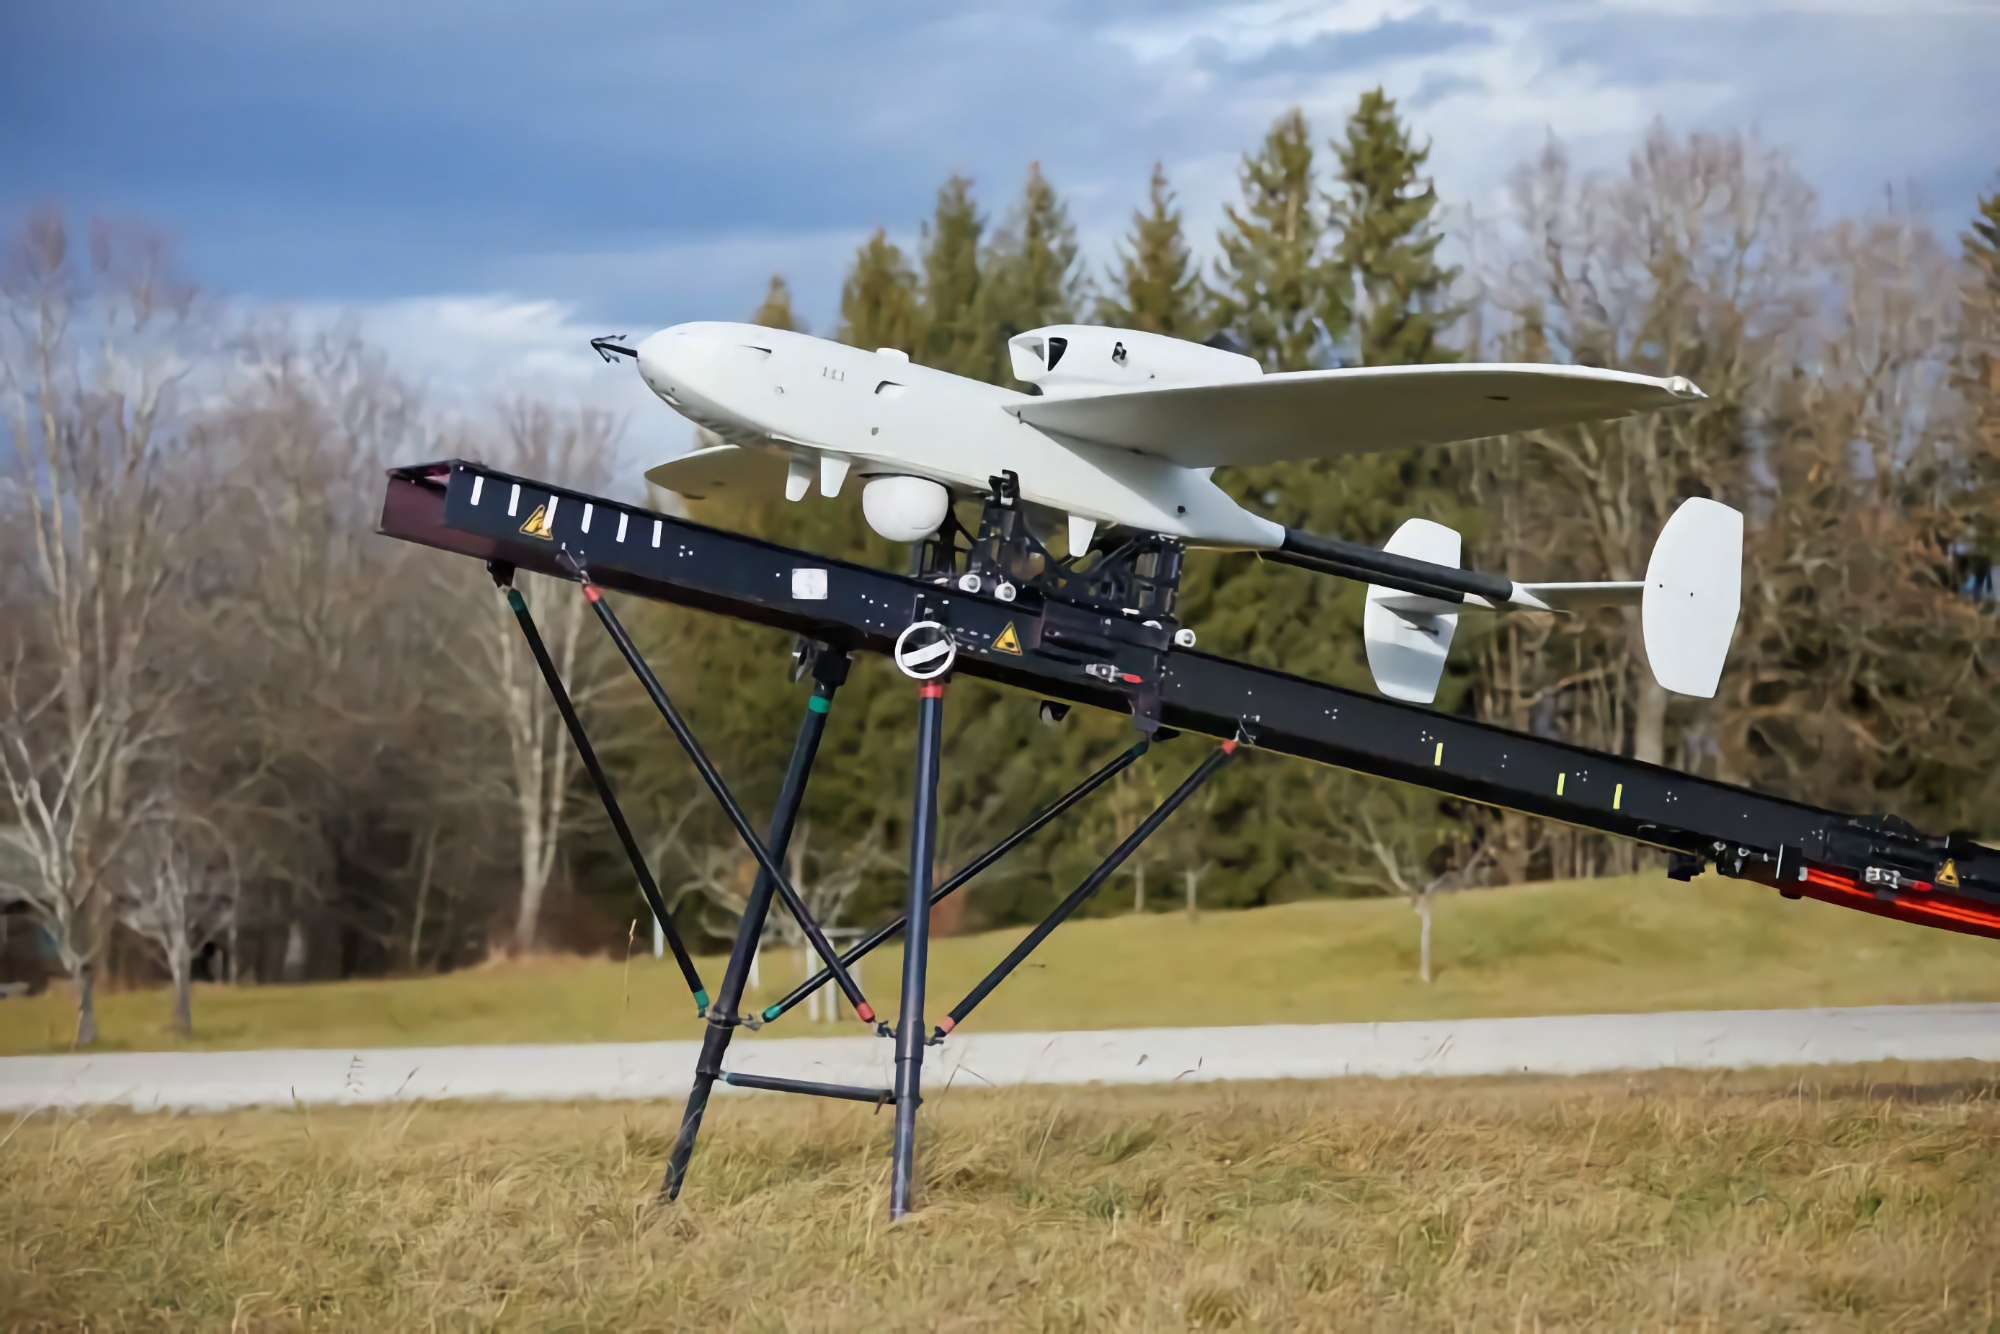 Rheinmetall confirmed that it will transfer Luna NG reconnaissance drones to the AFU